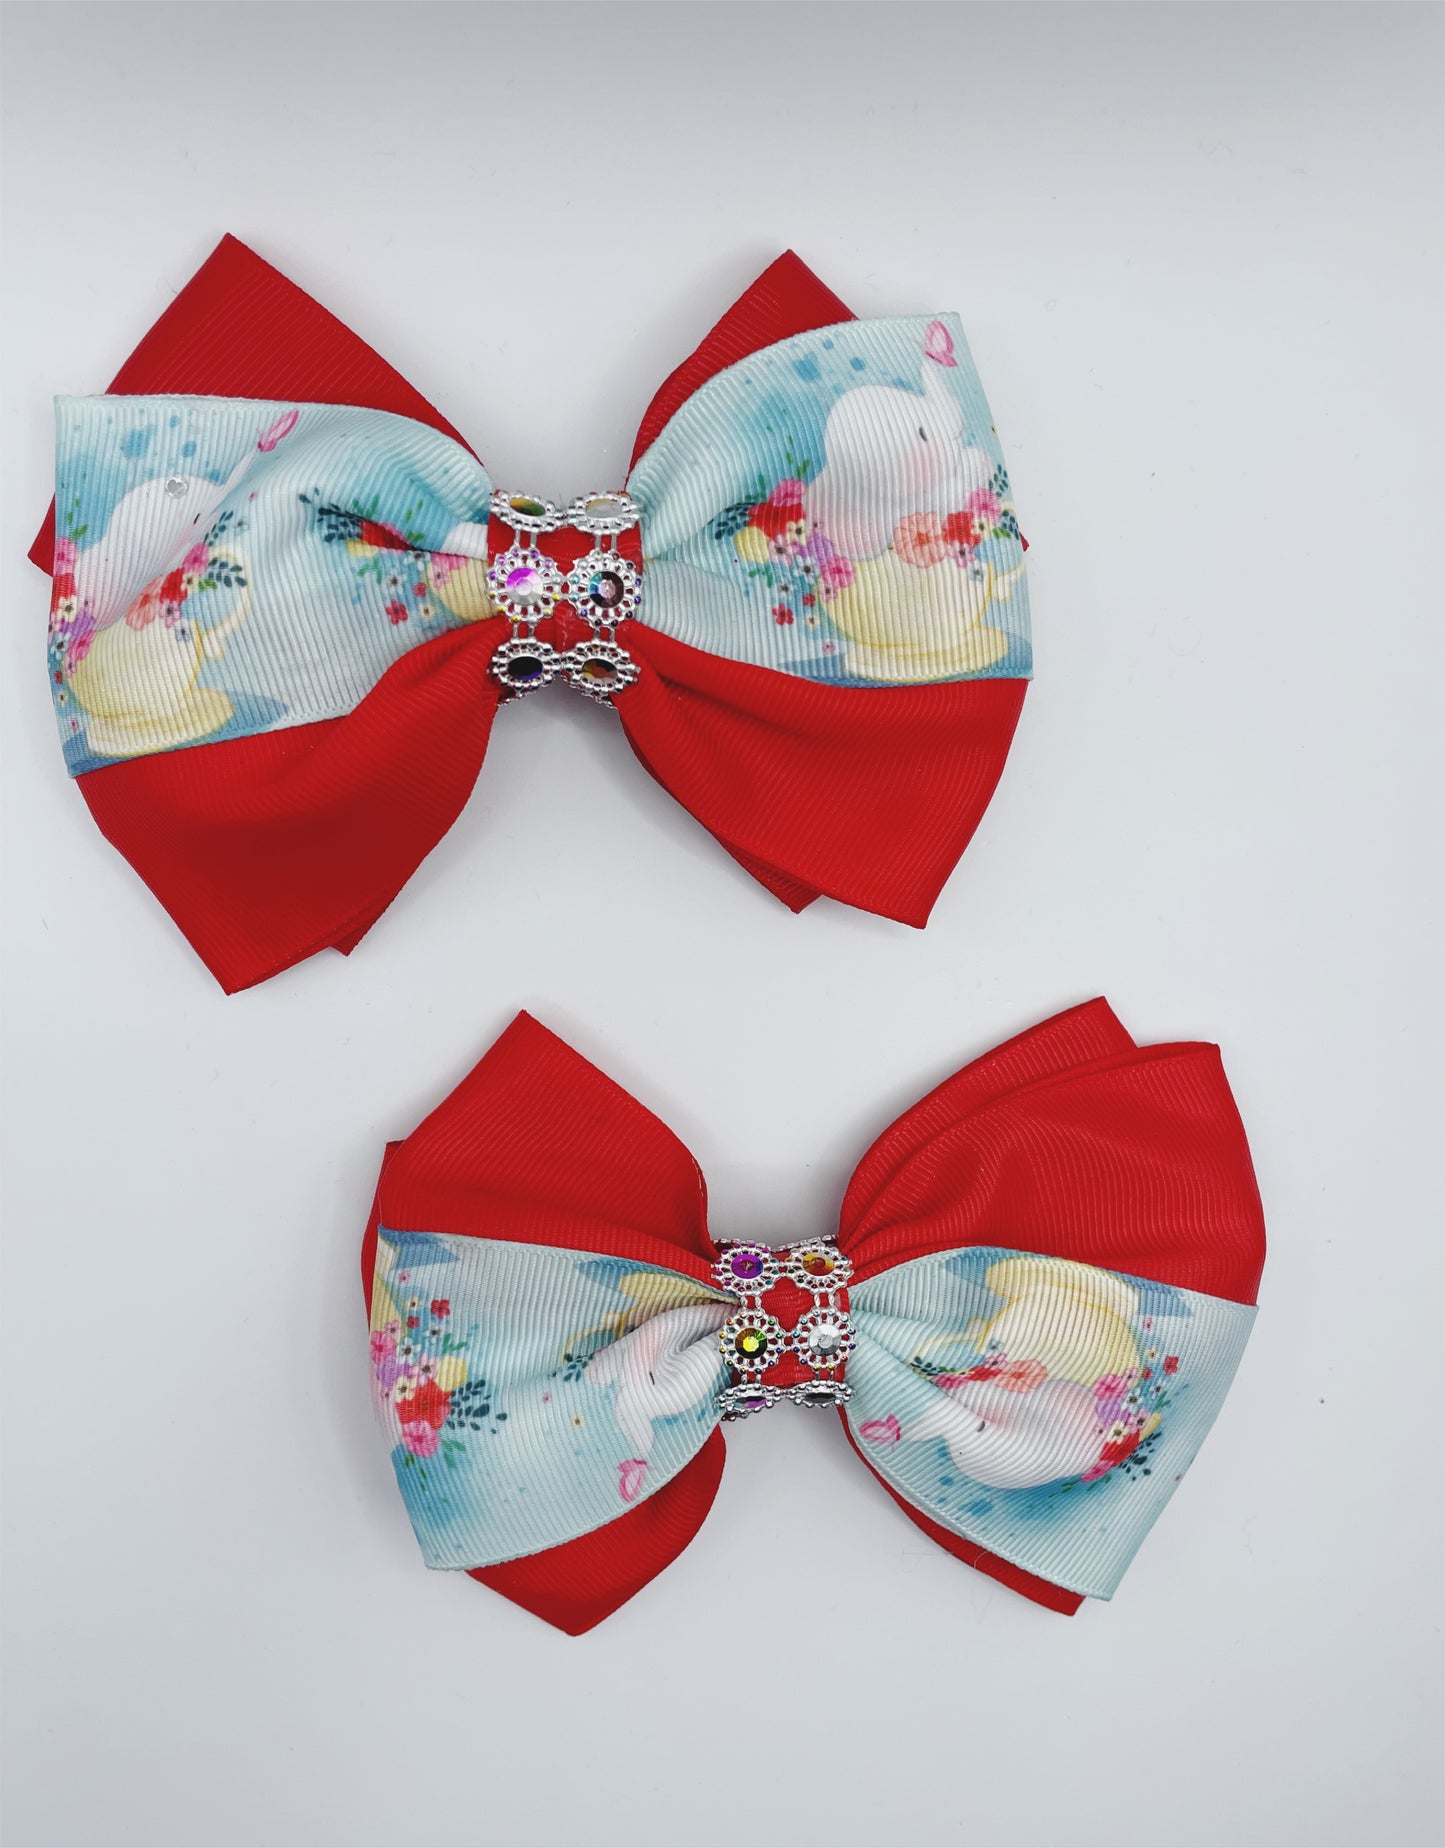 Pair of Hair Bows for Infants Toddlers Kids Teens Red Pairs of Bows for Girl Grossgrain Ribbons Pair Bows Hair Bows for Girl Alligator Clips